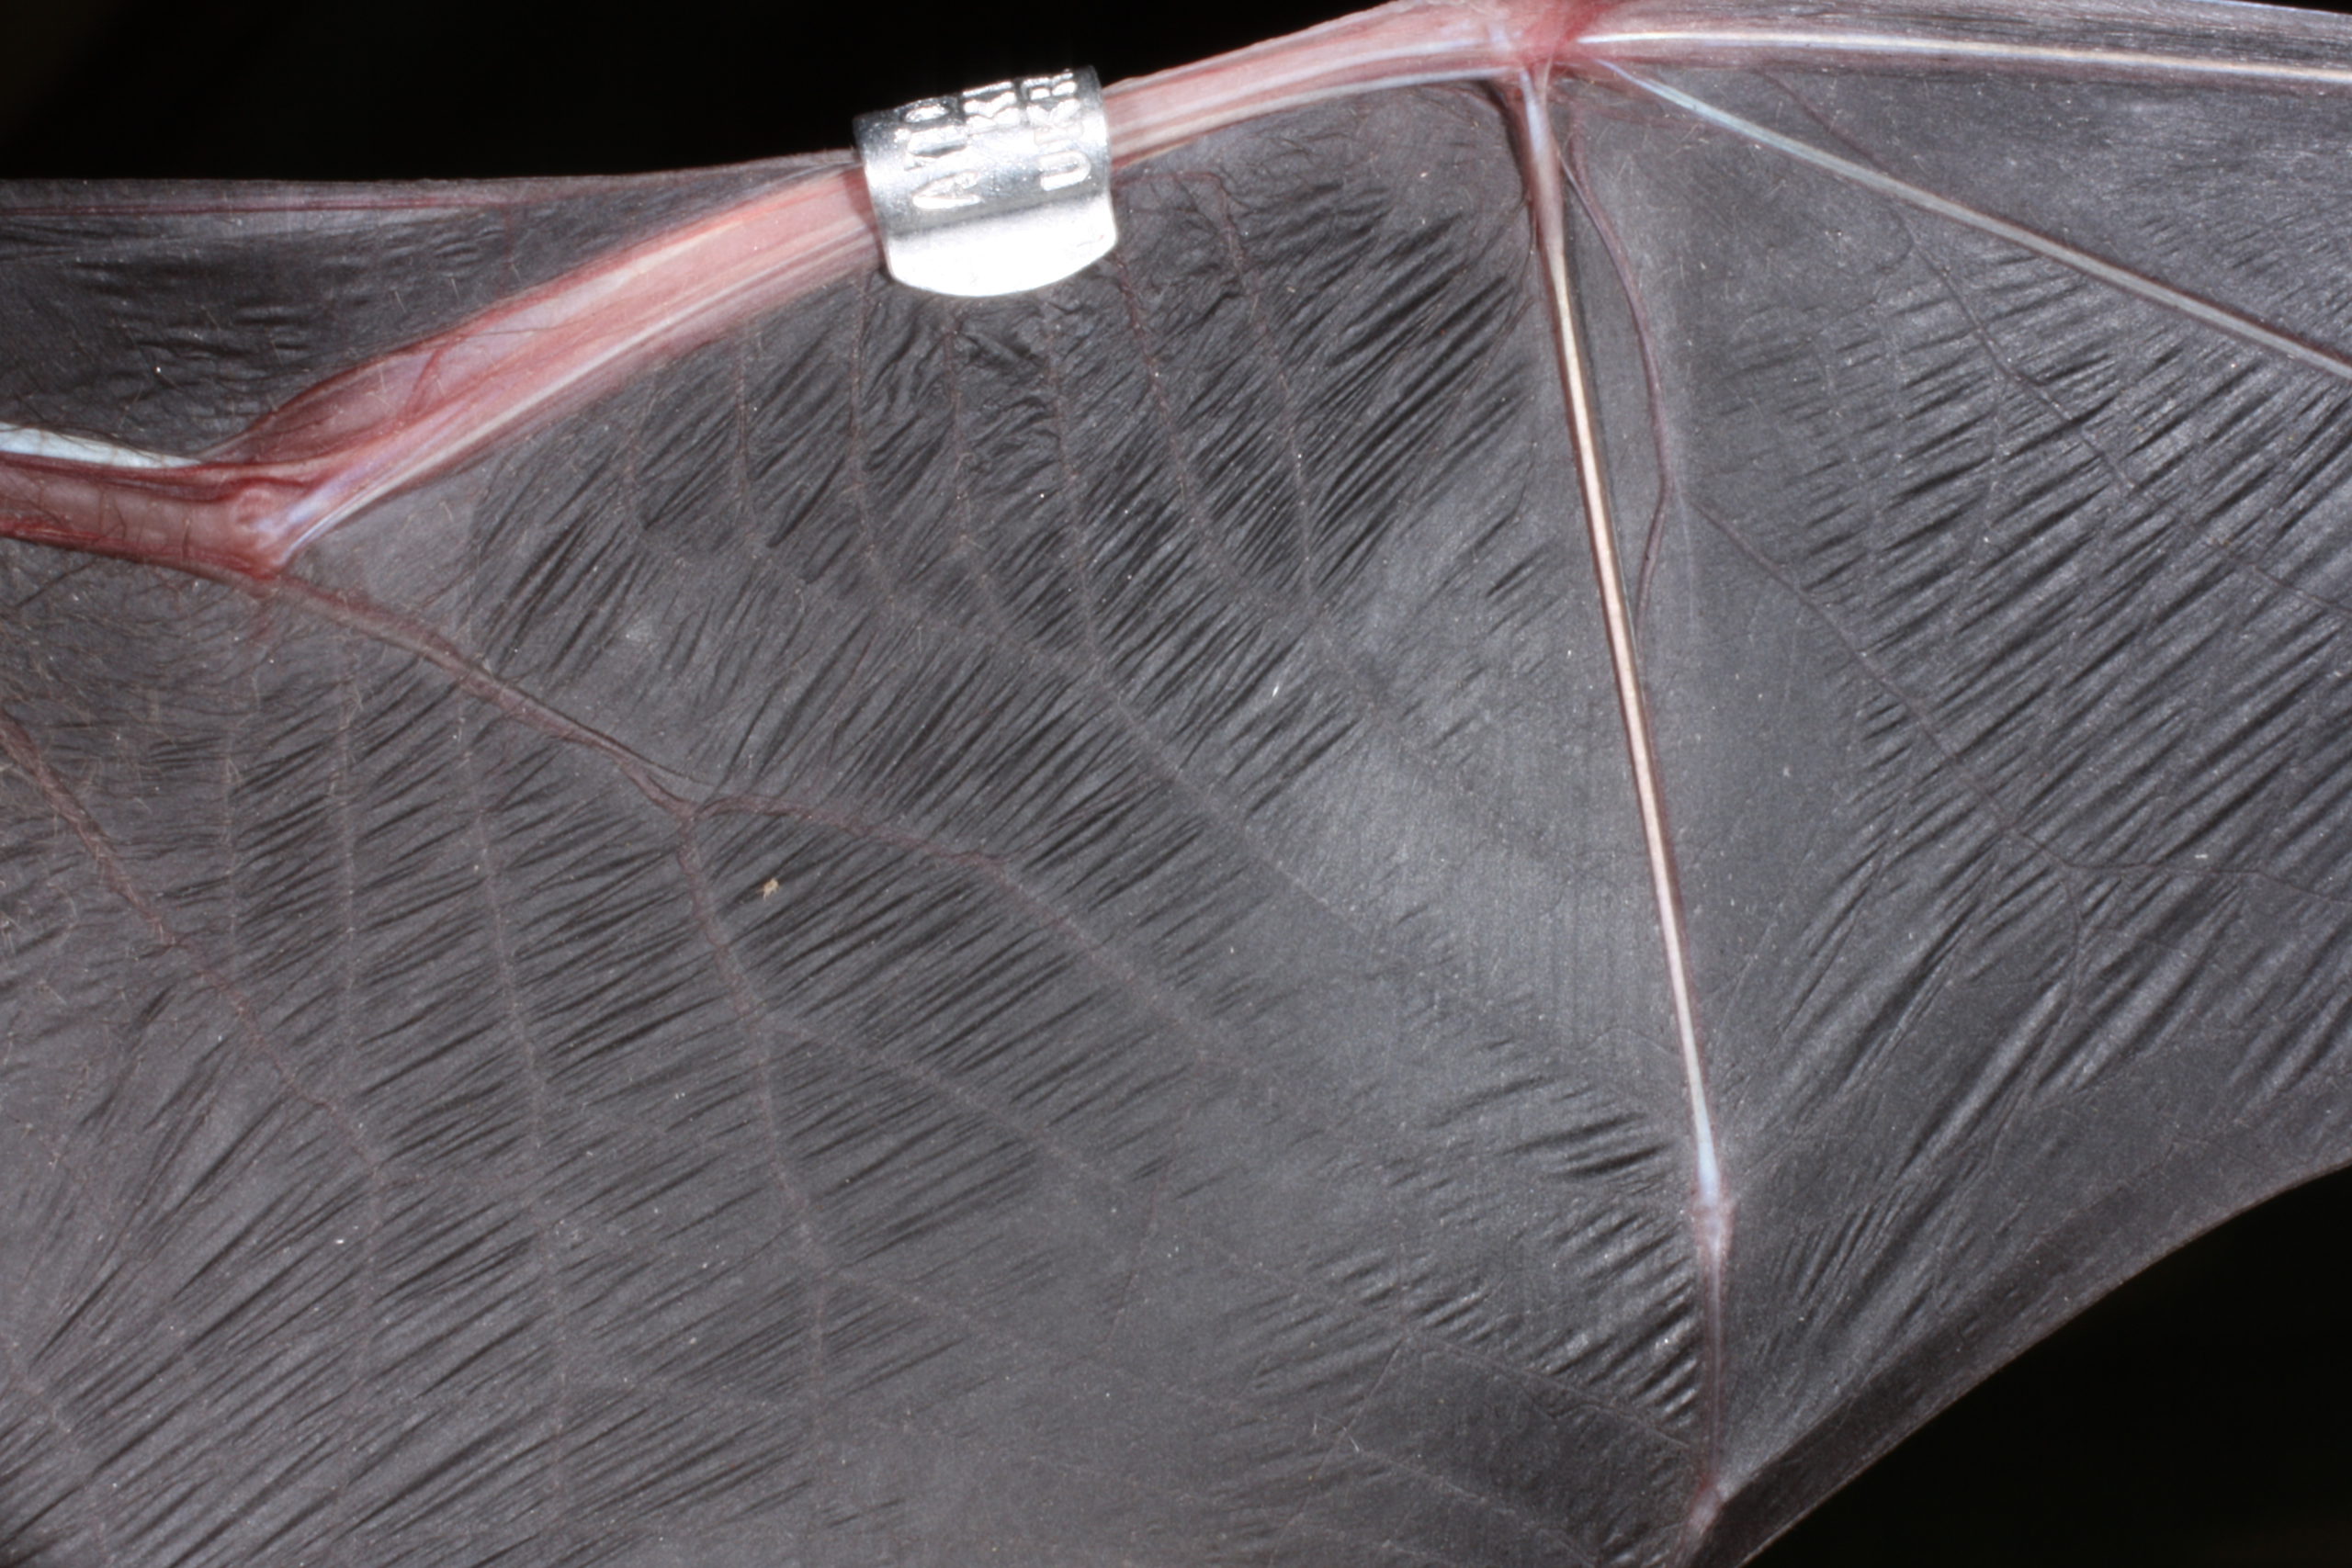 The structure of the bat wing